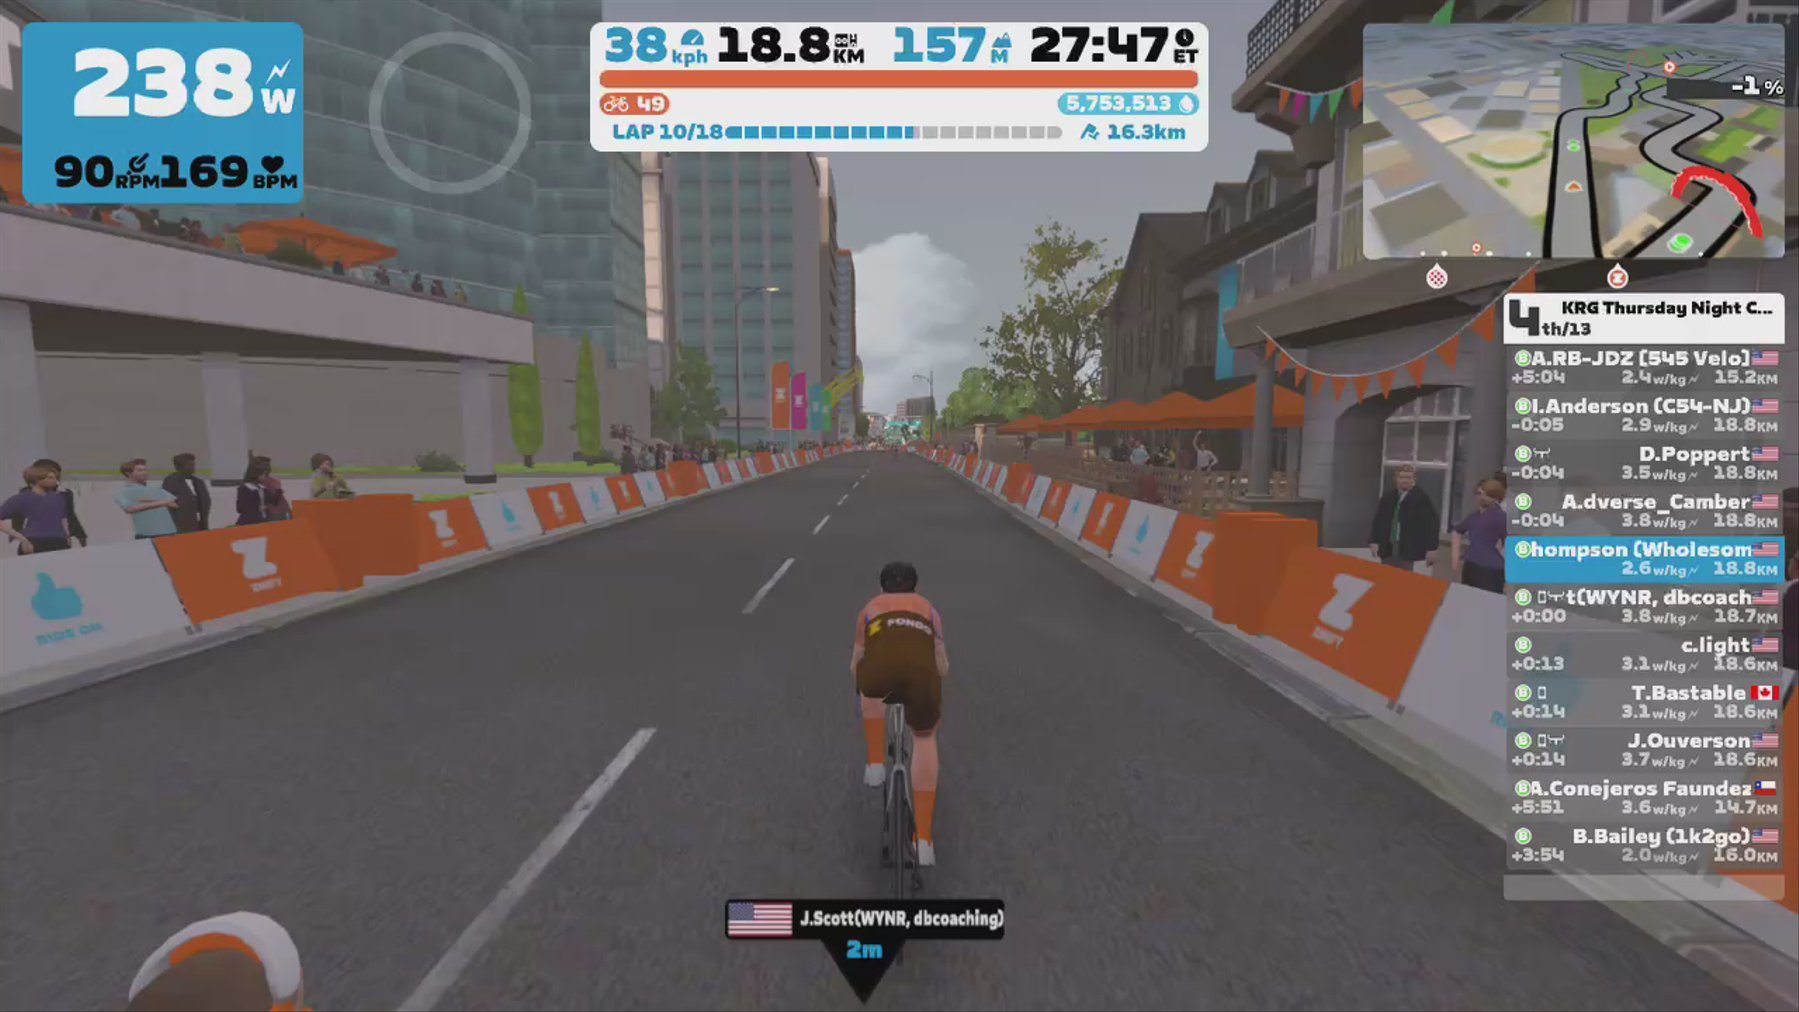 Zwift - Race: KRG Thursday Night Crit  (B) on Downtown Dolphin in Crit City